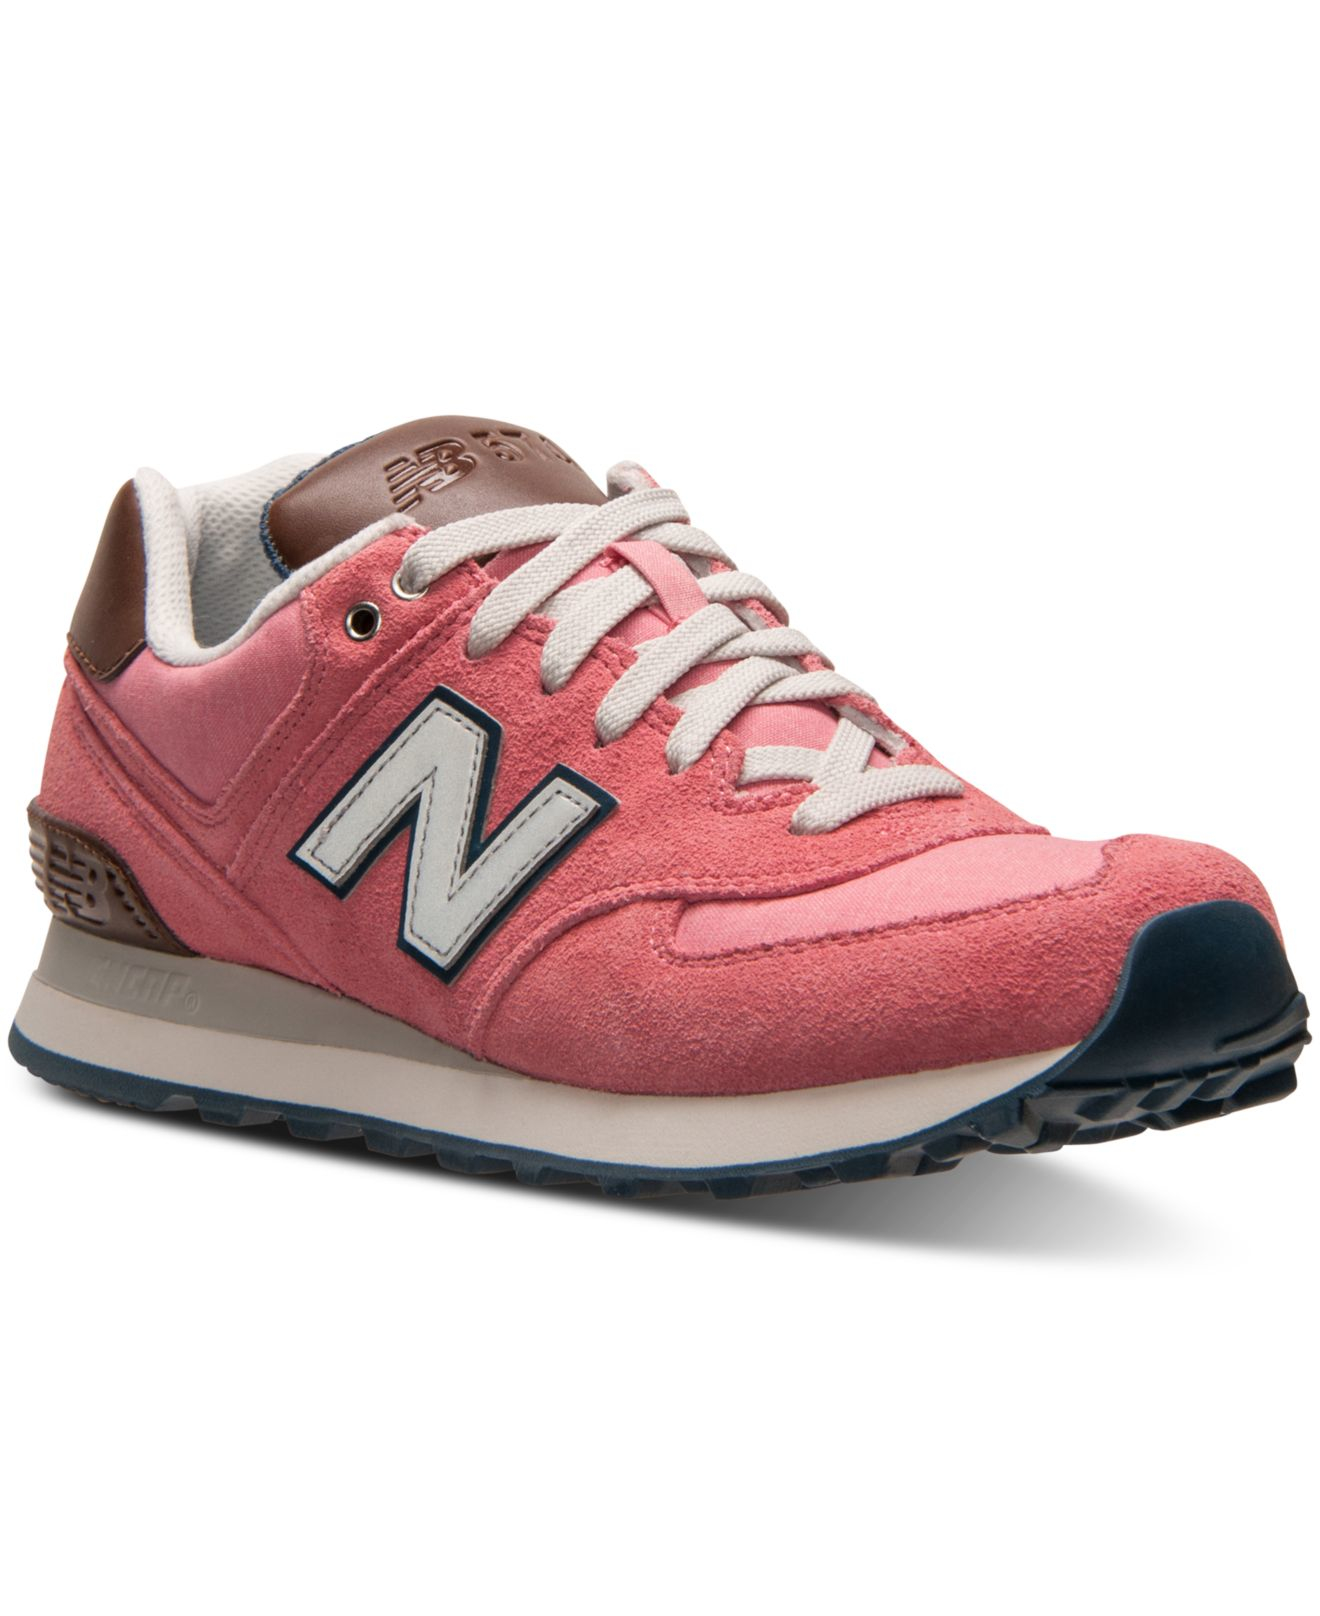 New Balance Women's 574 Beach Cruiser Casual Sneakers From Finish Line ...